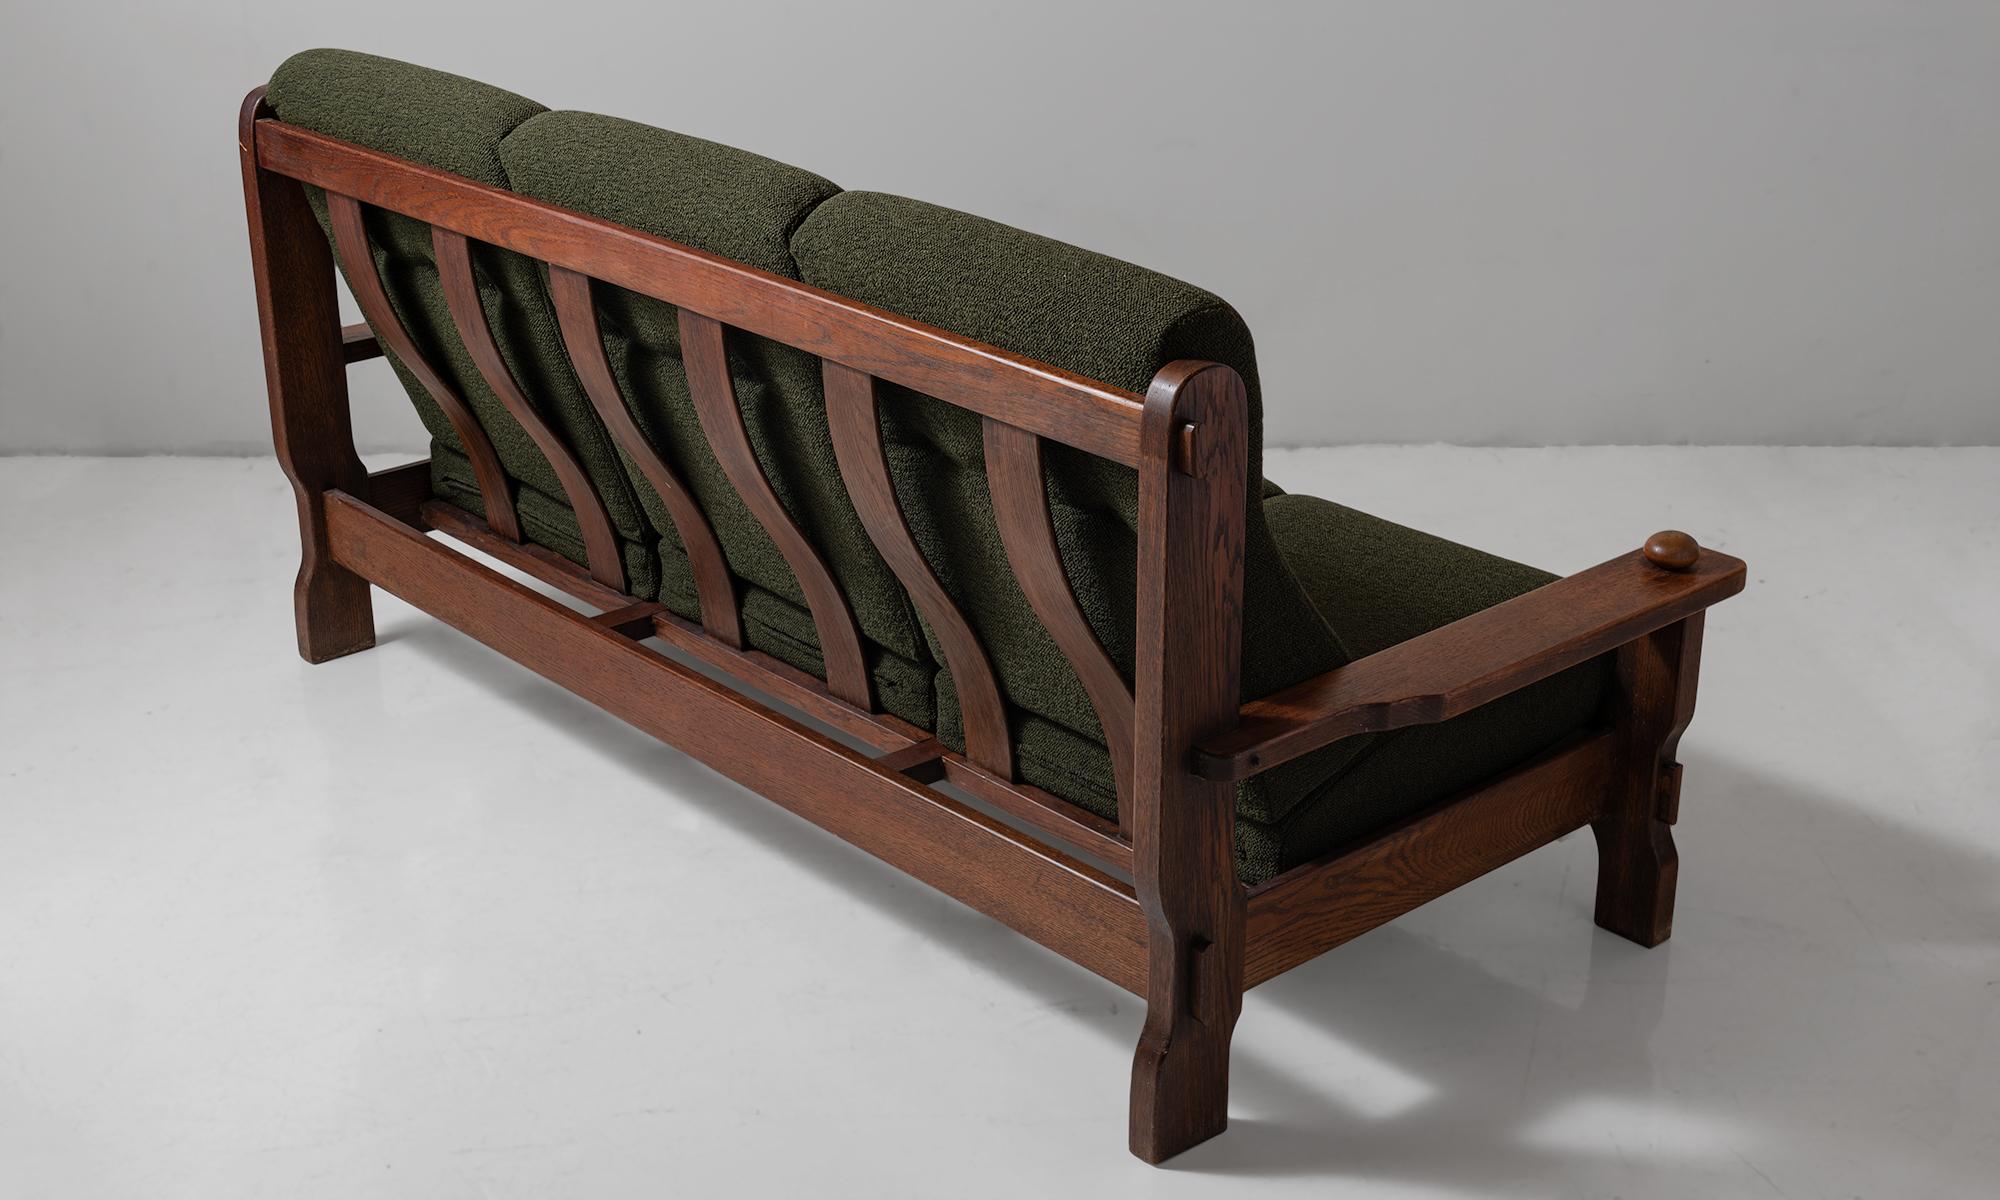 French Brutalist Oak Sofa in Textured Wool Blend from Maharam, France, circa 1950